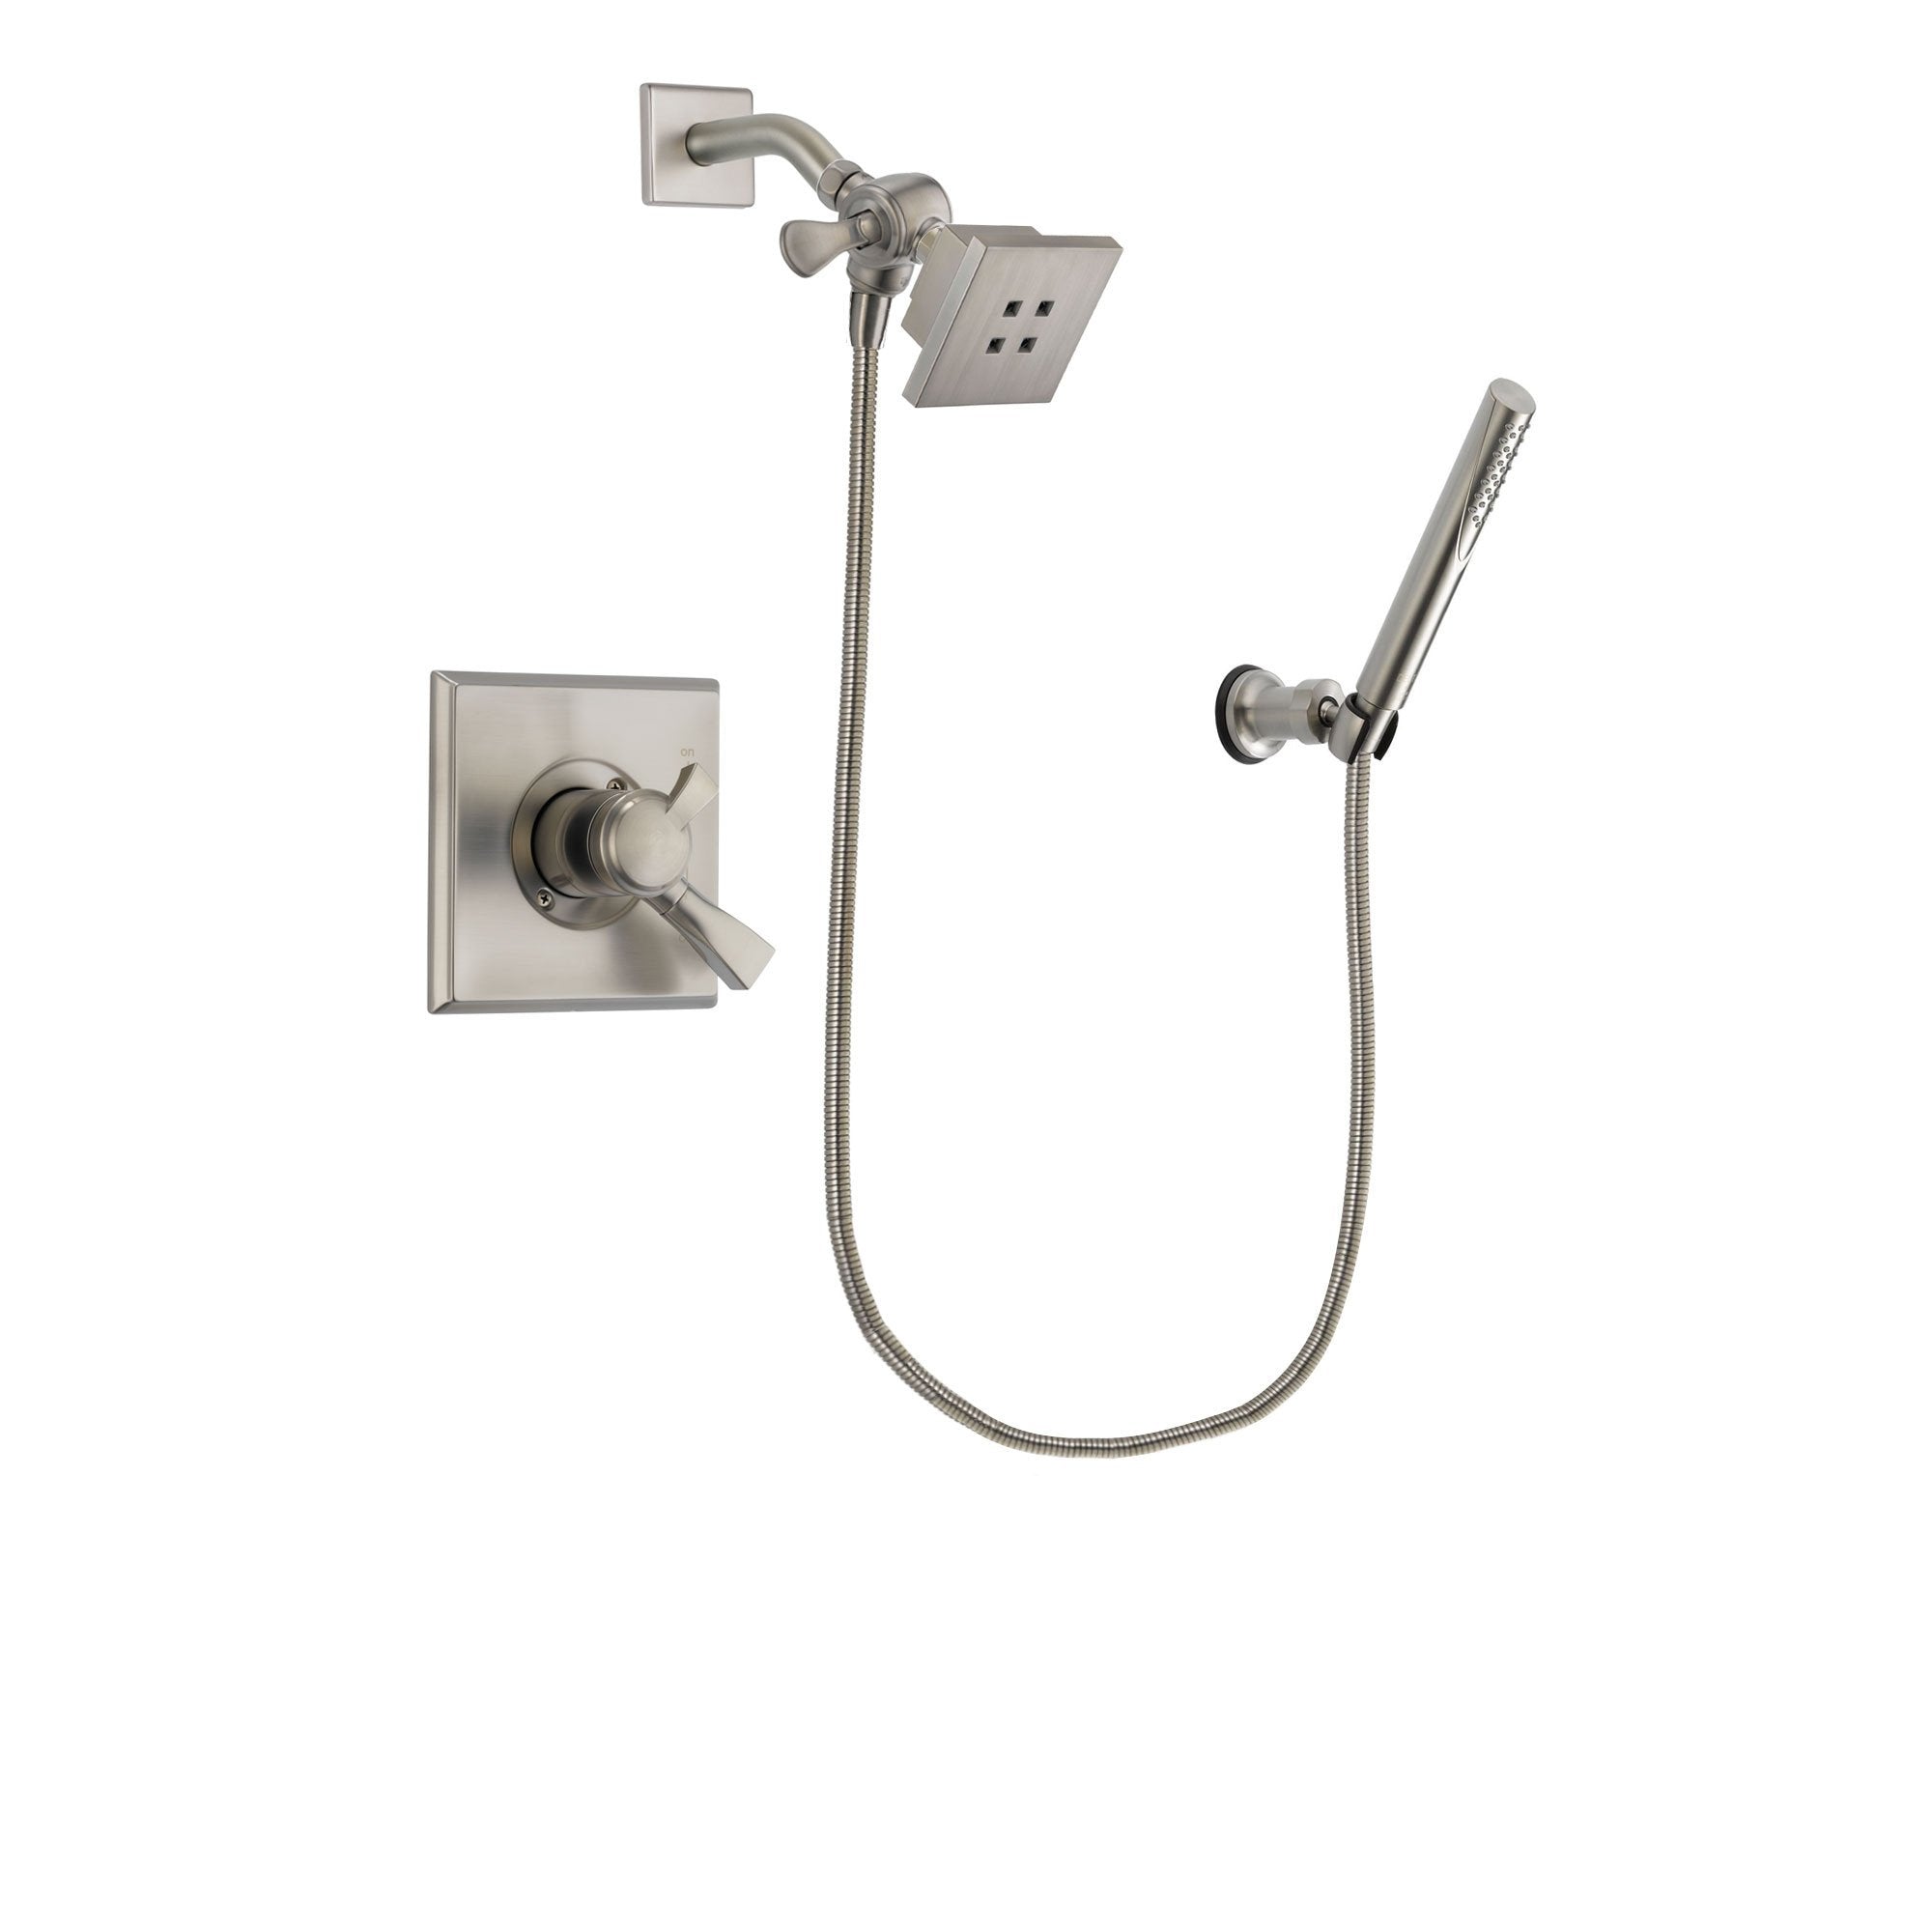 Delta Dryden Stainless Steel Finish Dual Control Shower Faucet System Package with Square Showerhead and Modern Handheld Shower Spray Includes Rough-in Valve DSP2124V